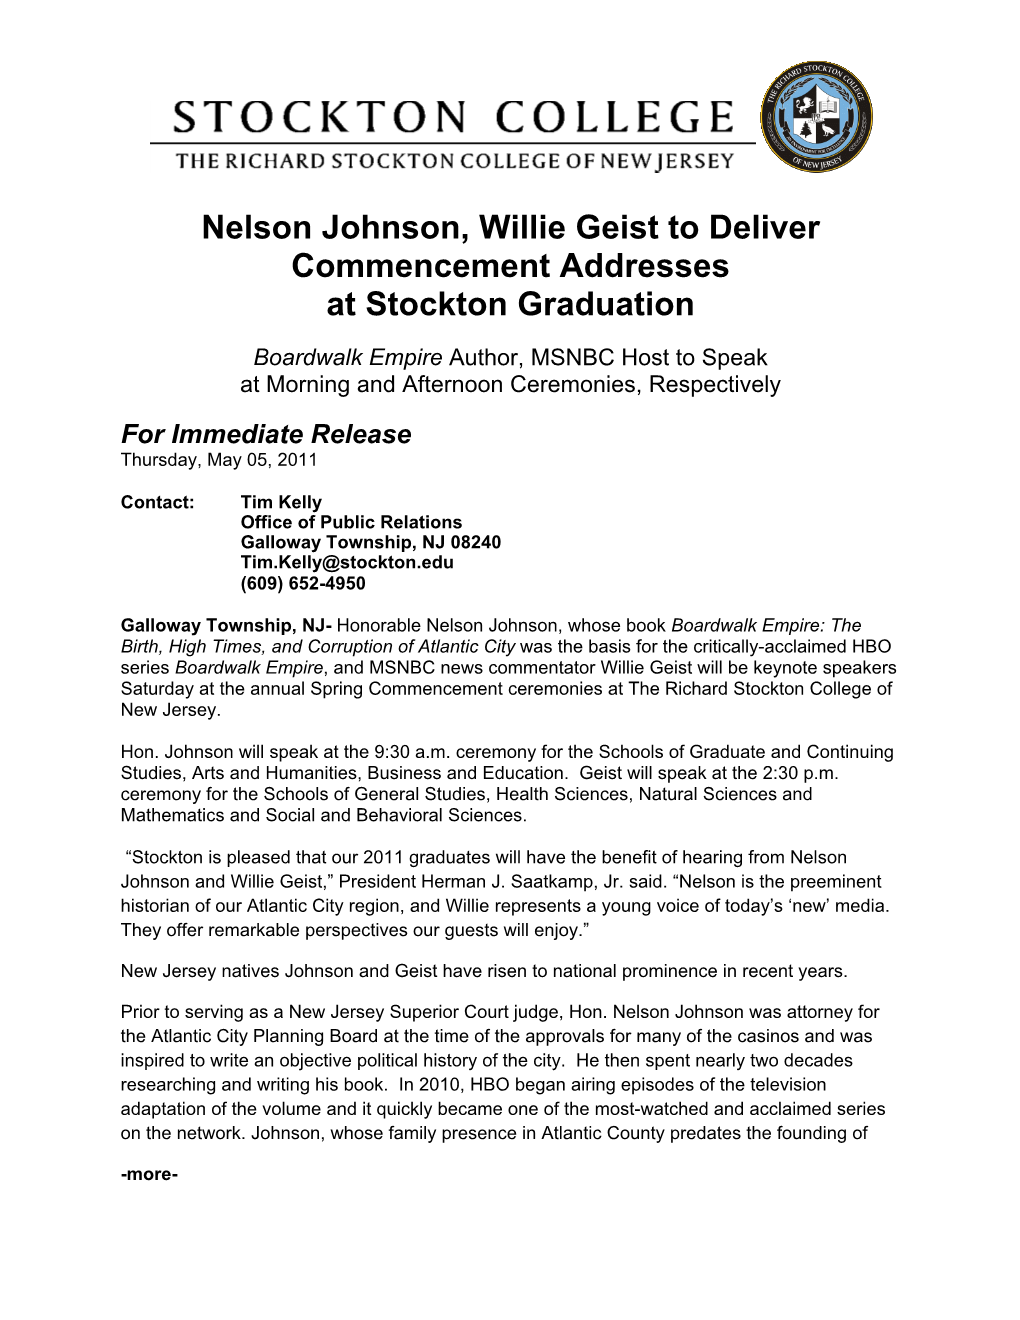 Nelson Johnson, Willie Geist to Deliver Commencement Addresses at Stockton Graduation